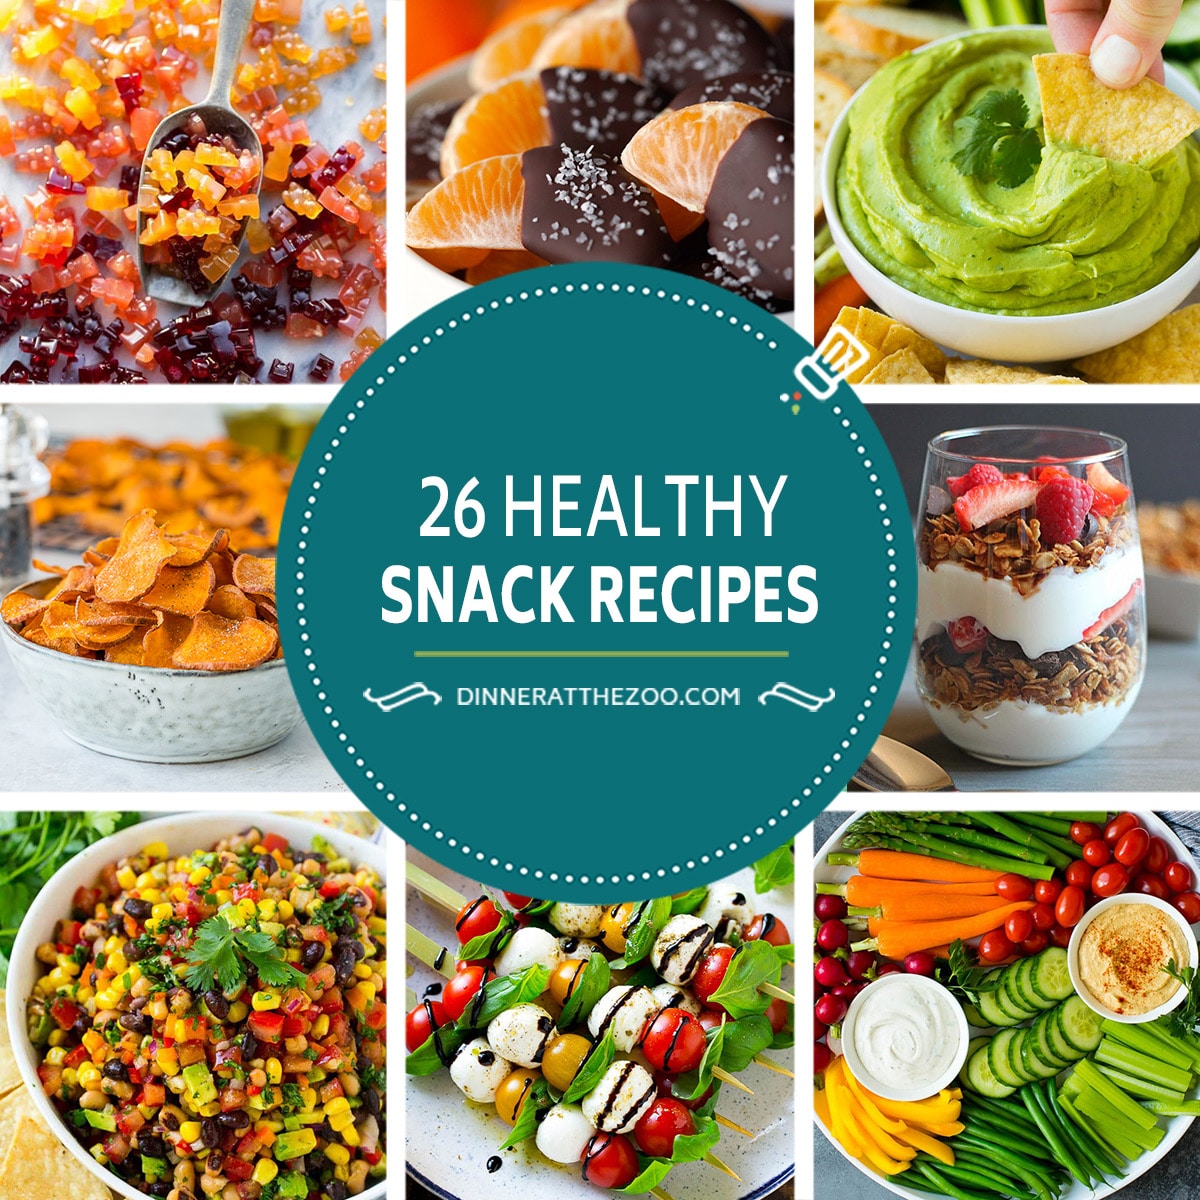 A group of healthy snack recipes like cowboy caviar and caprese skewers.